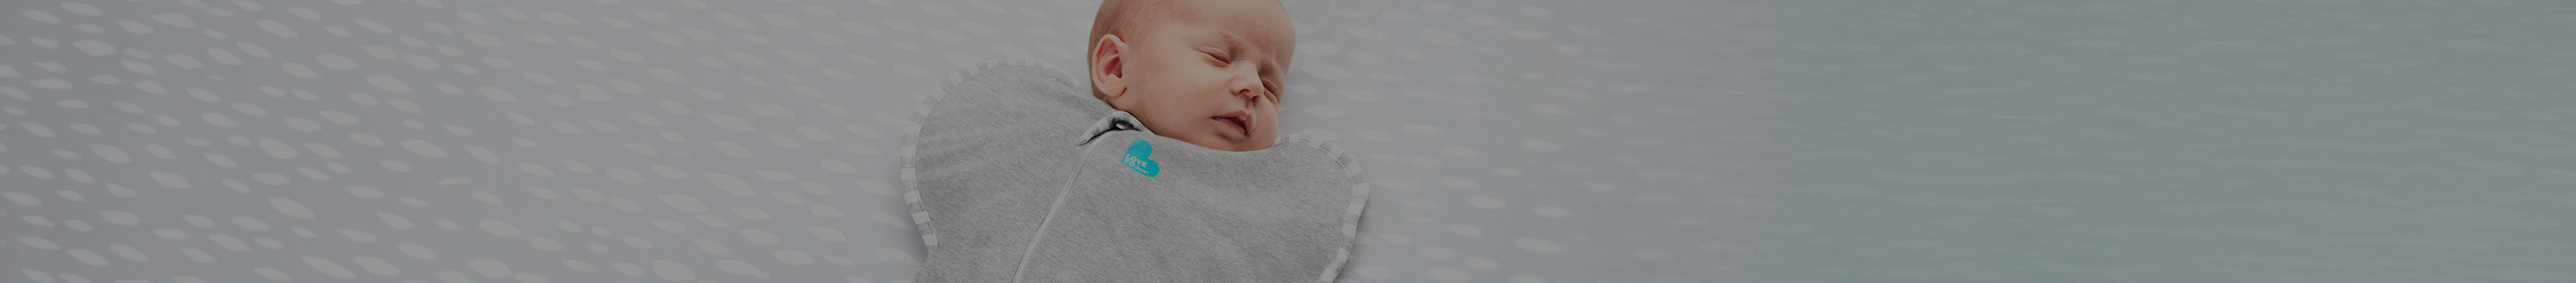 Baby sleeping in the innovative Love To Dream SWADDLE up sleep sack